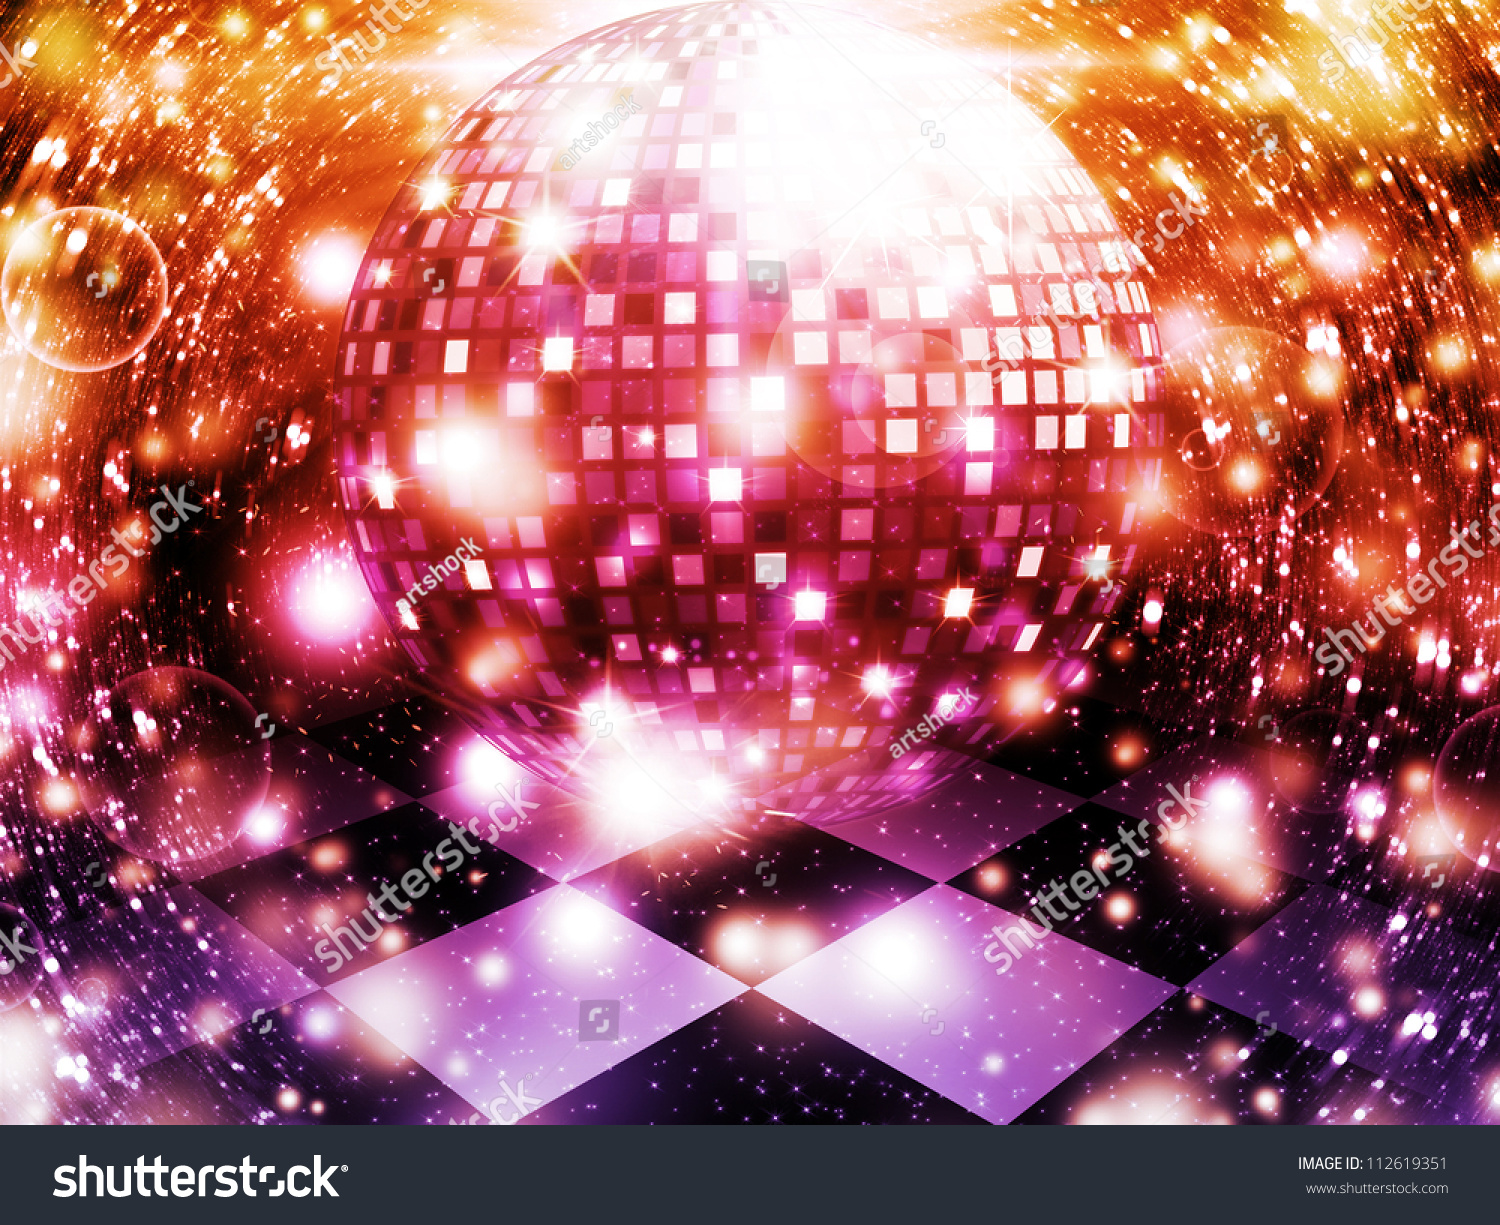 Illustration Of Abstract Dancing Floor With Disco Ball. - 112619351 ...